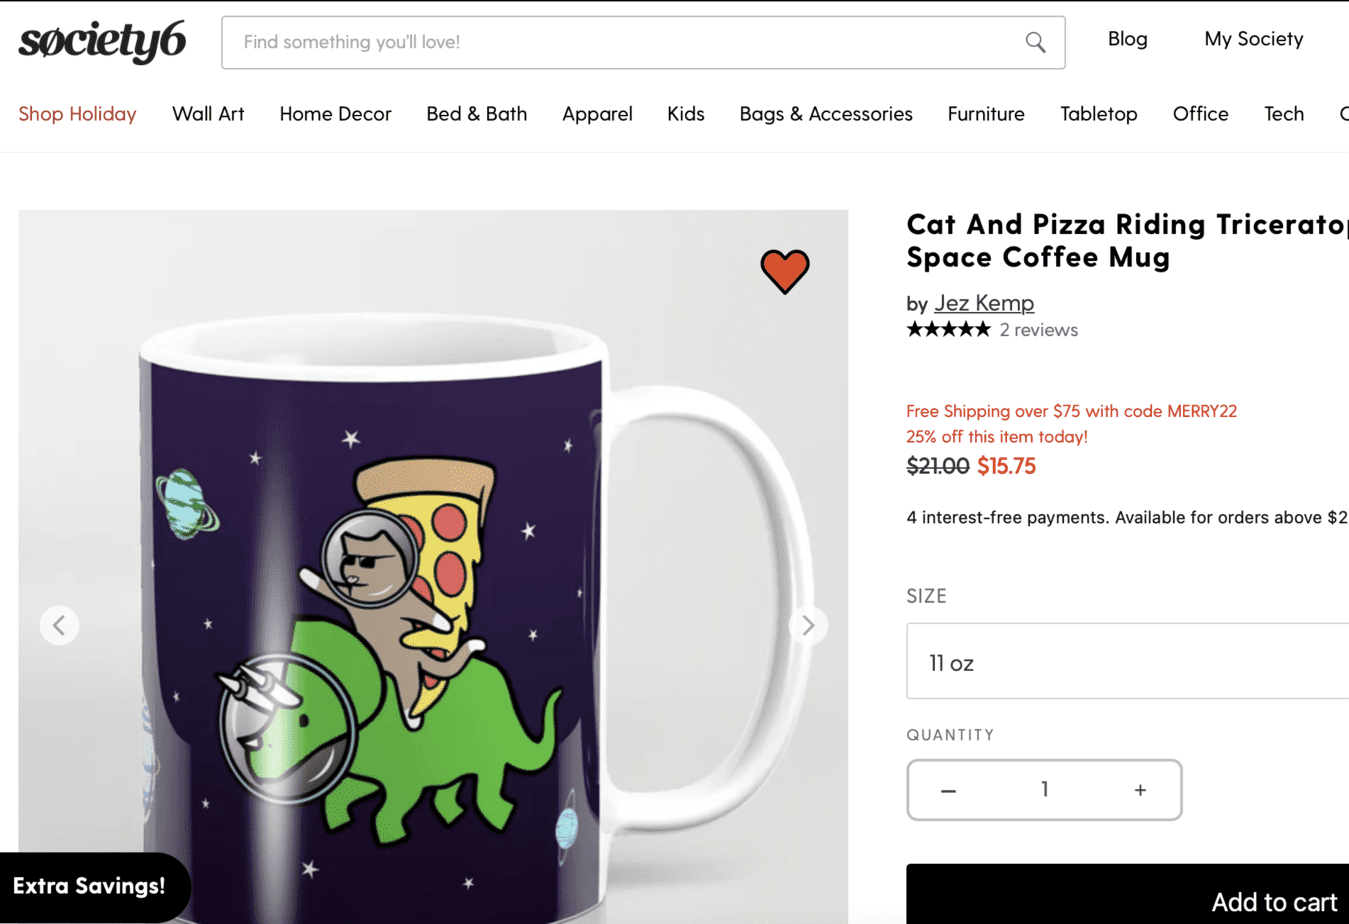 Cat And Pizza Riding Triceratops In Space Coffee Mug from Society6. dinosaur gifts for a 5 year old